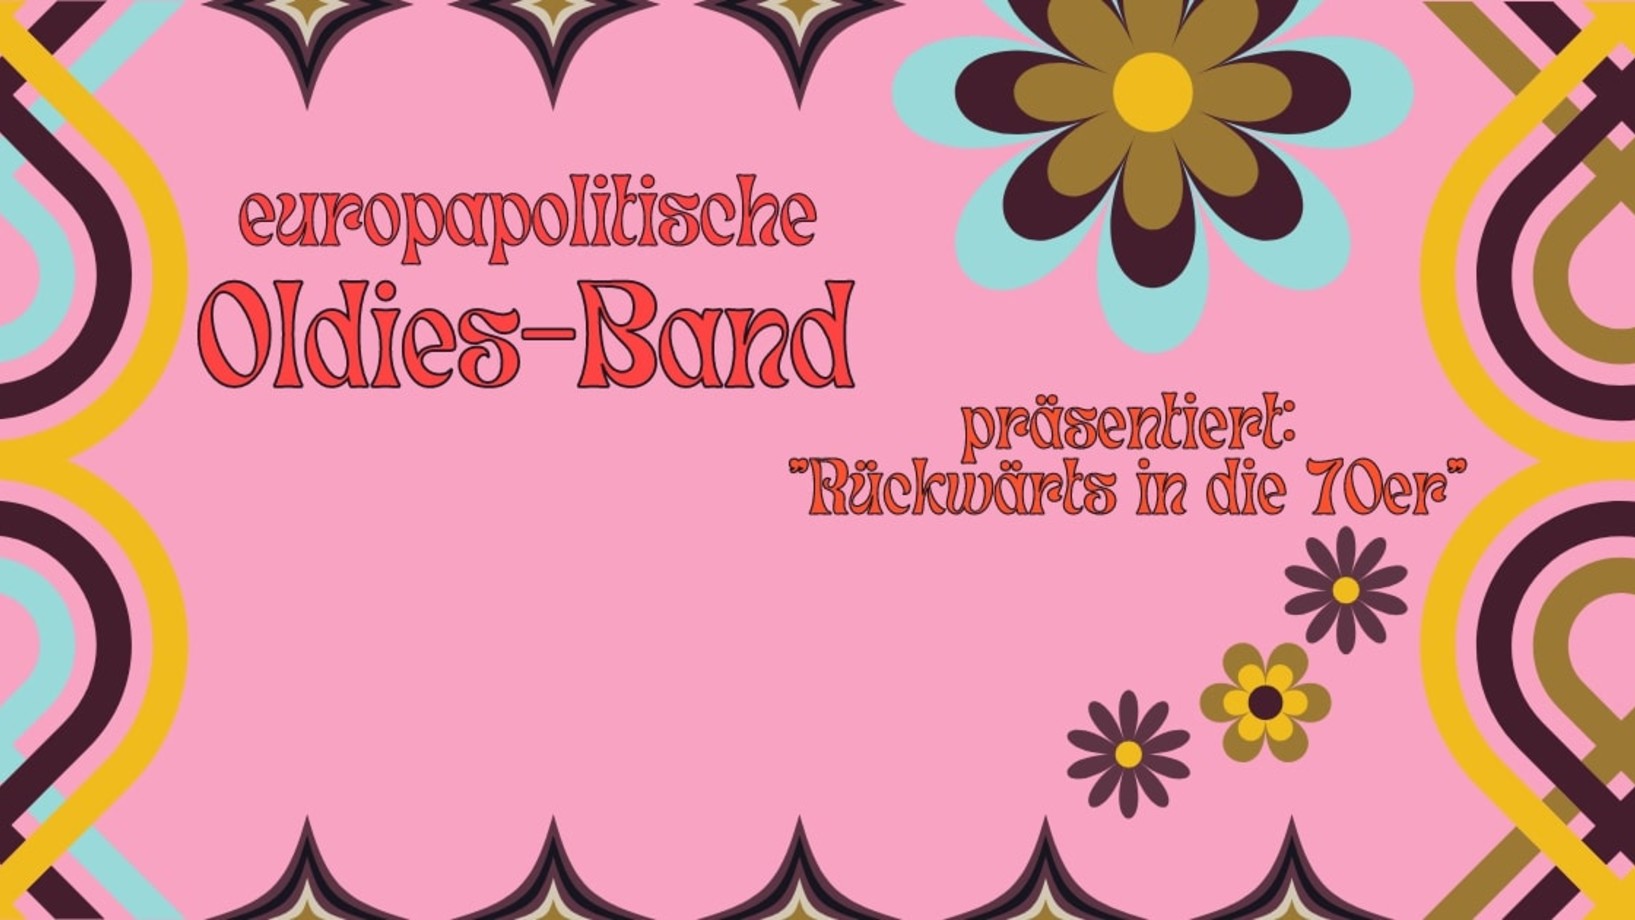 Europapolitische Oldies-Band will back to the 70s